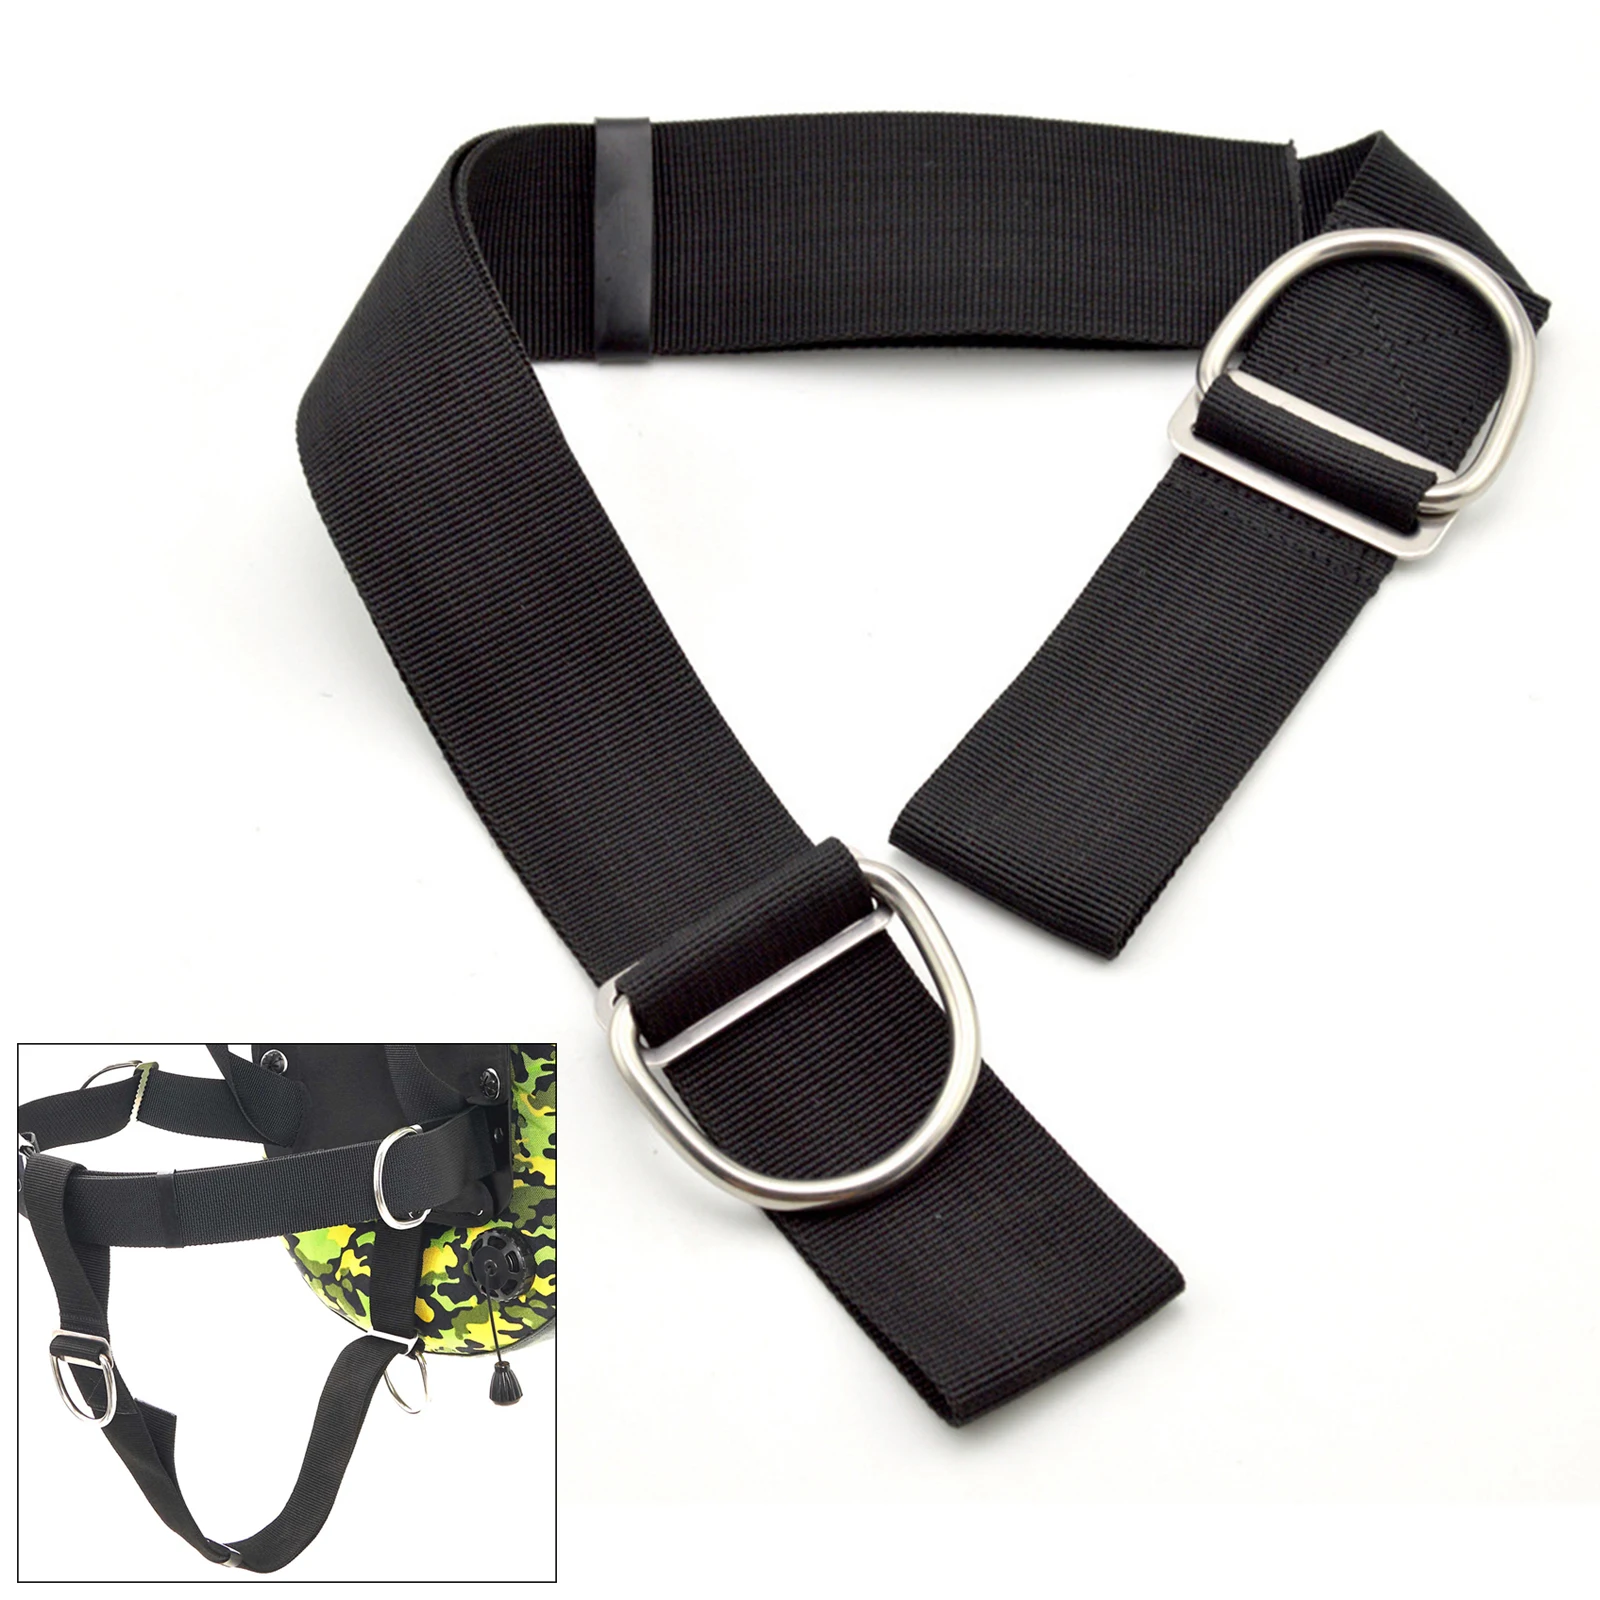 Adjustable Crotch Strap 50mm/2inch with D-ring Metal Loop For Tech Scuba Diving